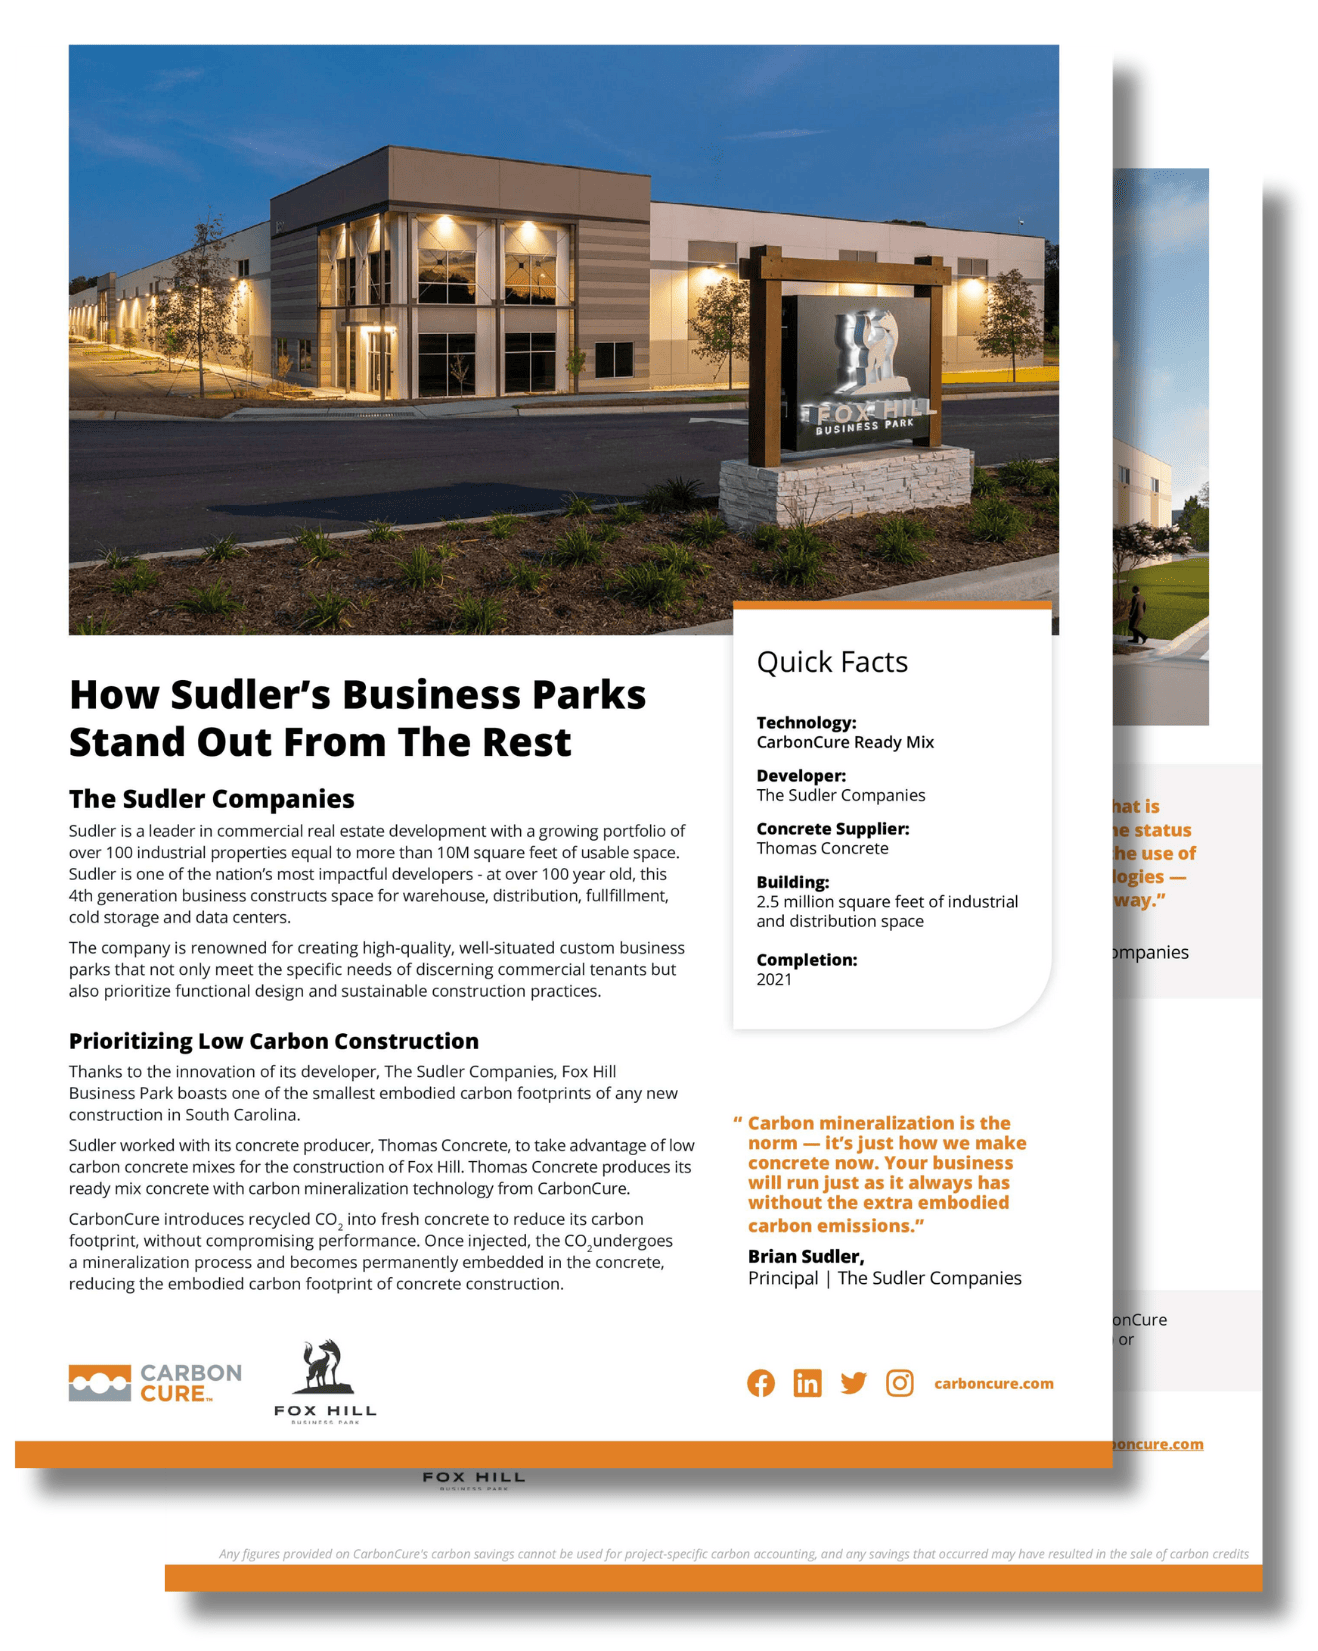 How Sudler’s Business Parks Stand Out From The Rest